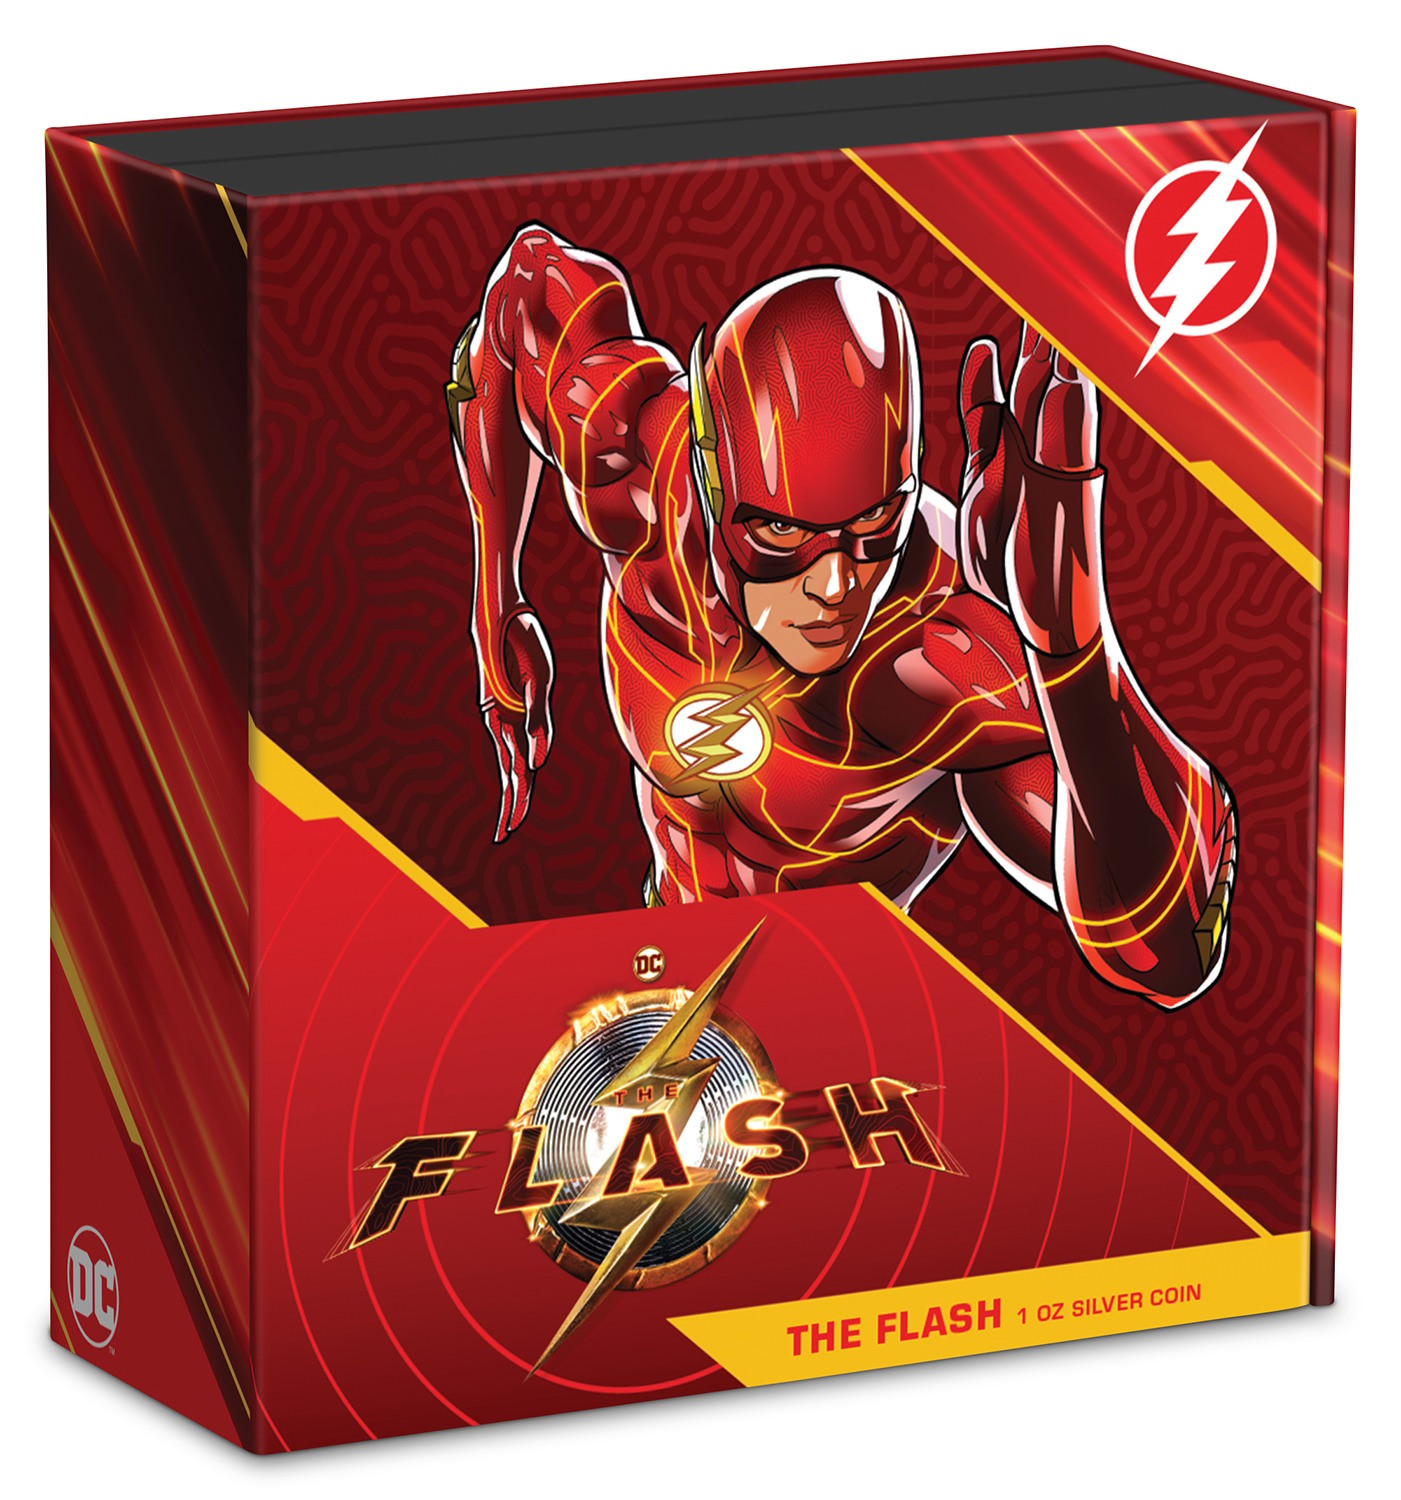 The Flash 1oz Silver Coin by New Zealand Mint | Sideshow Collectibles